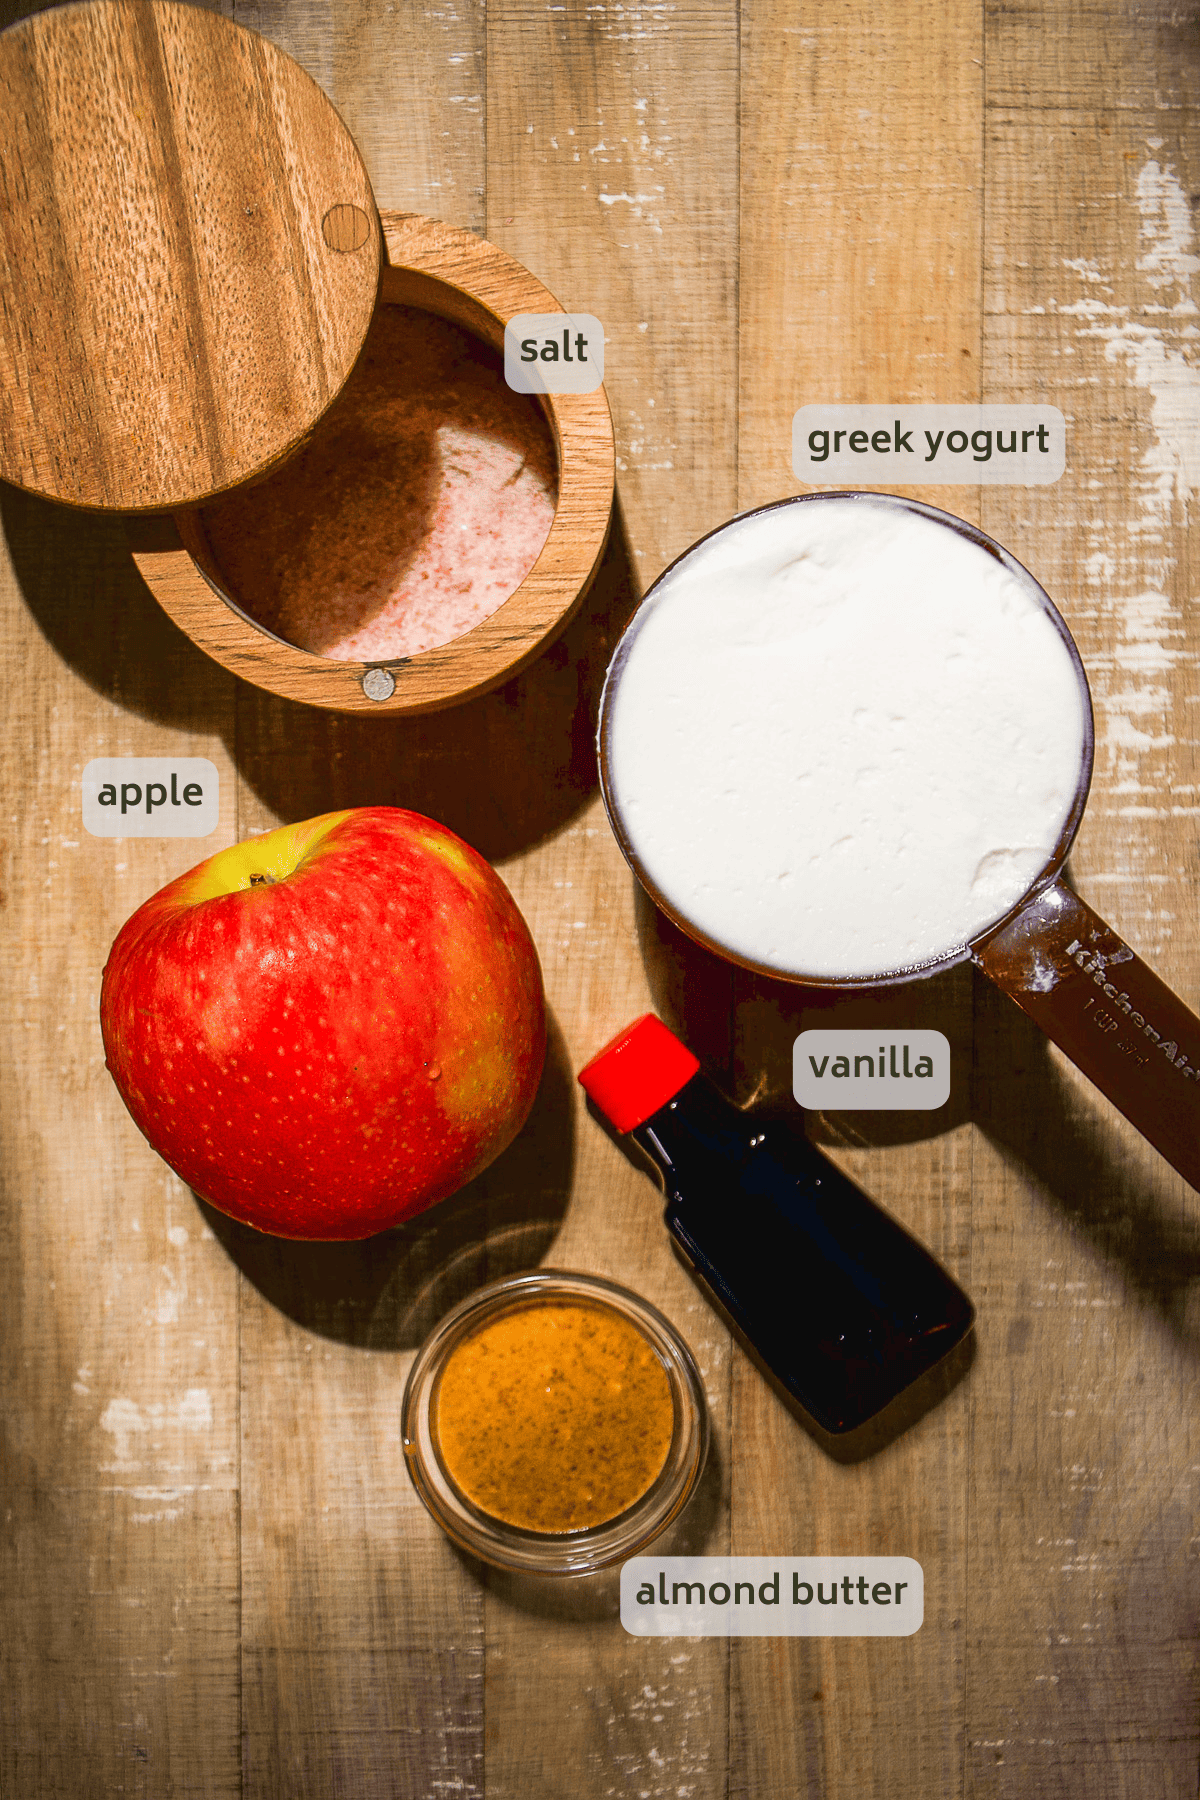 Yogurt fruit dip ingredients on a wooden surface with labels.